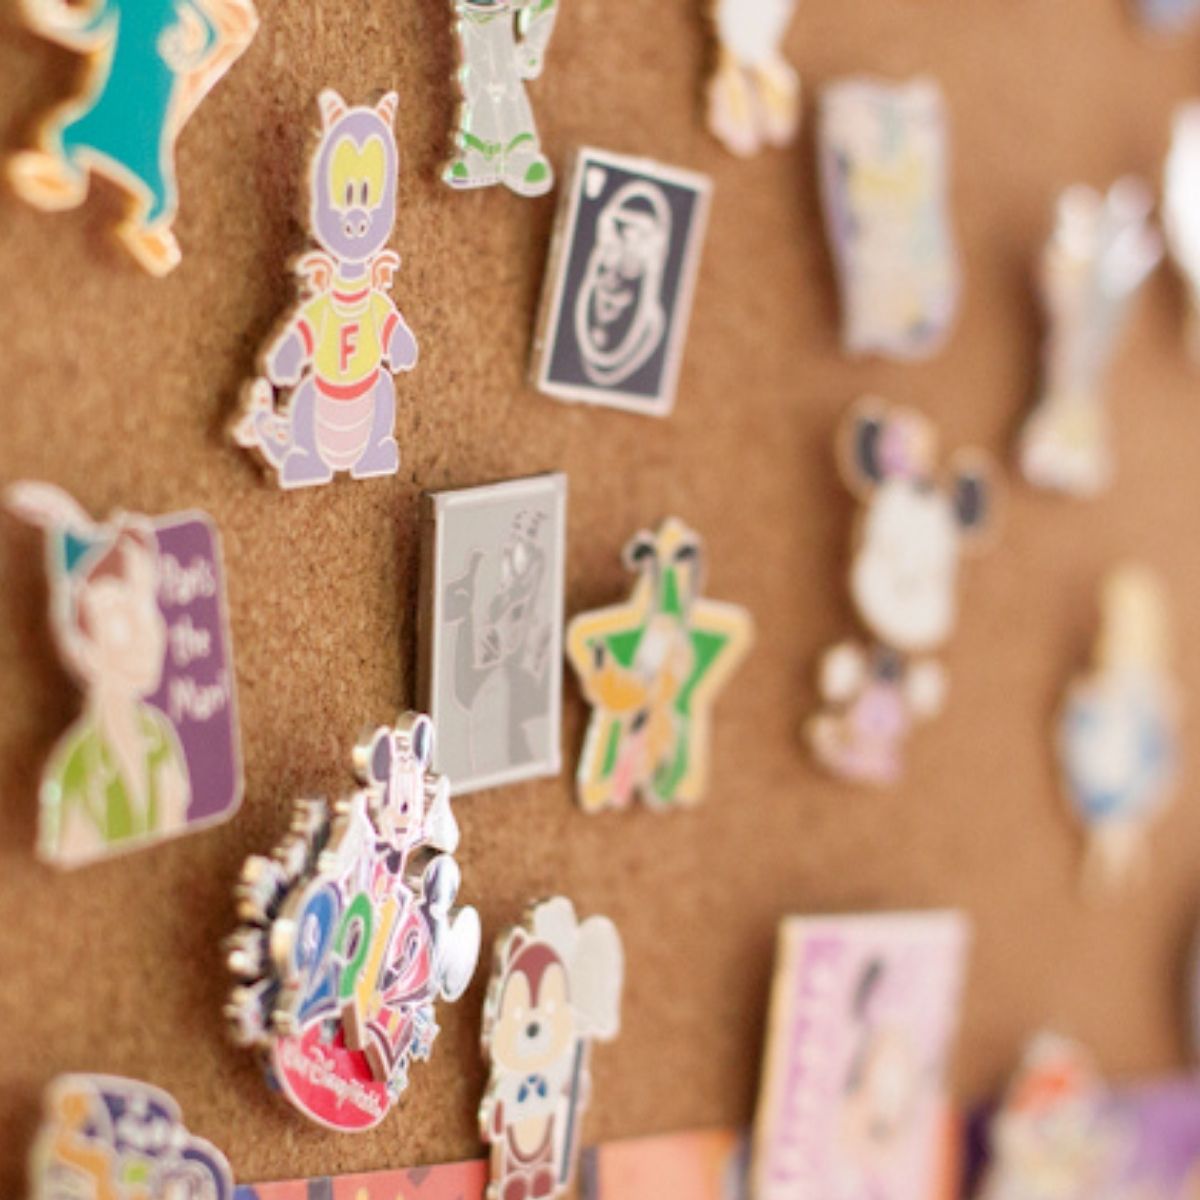 A close-up view of Disney pins on a corkboard.